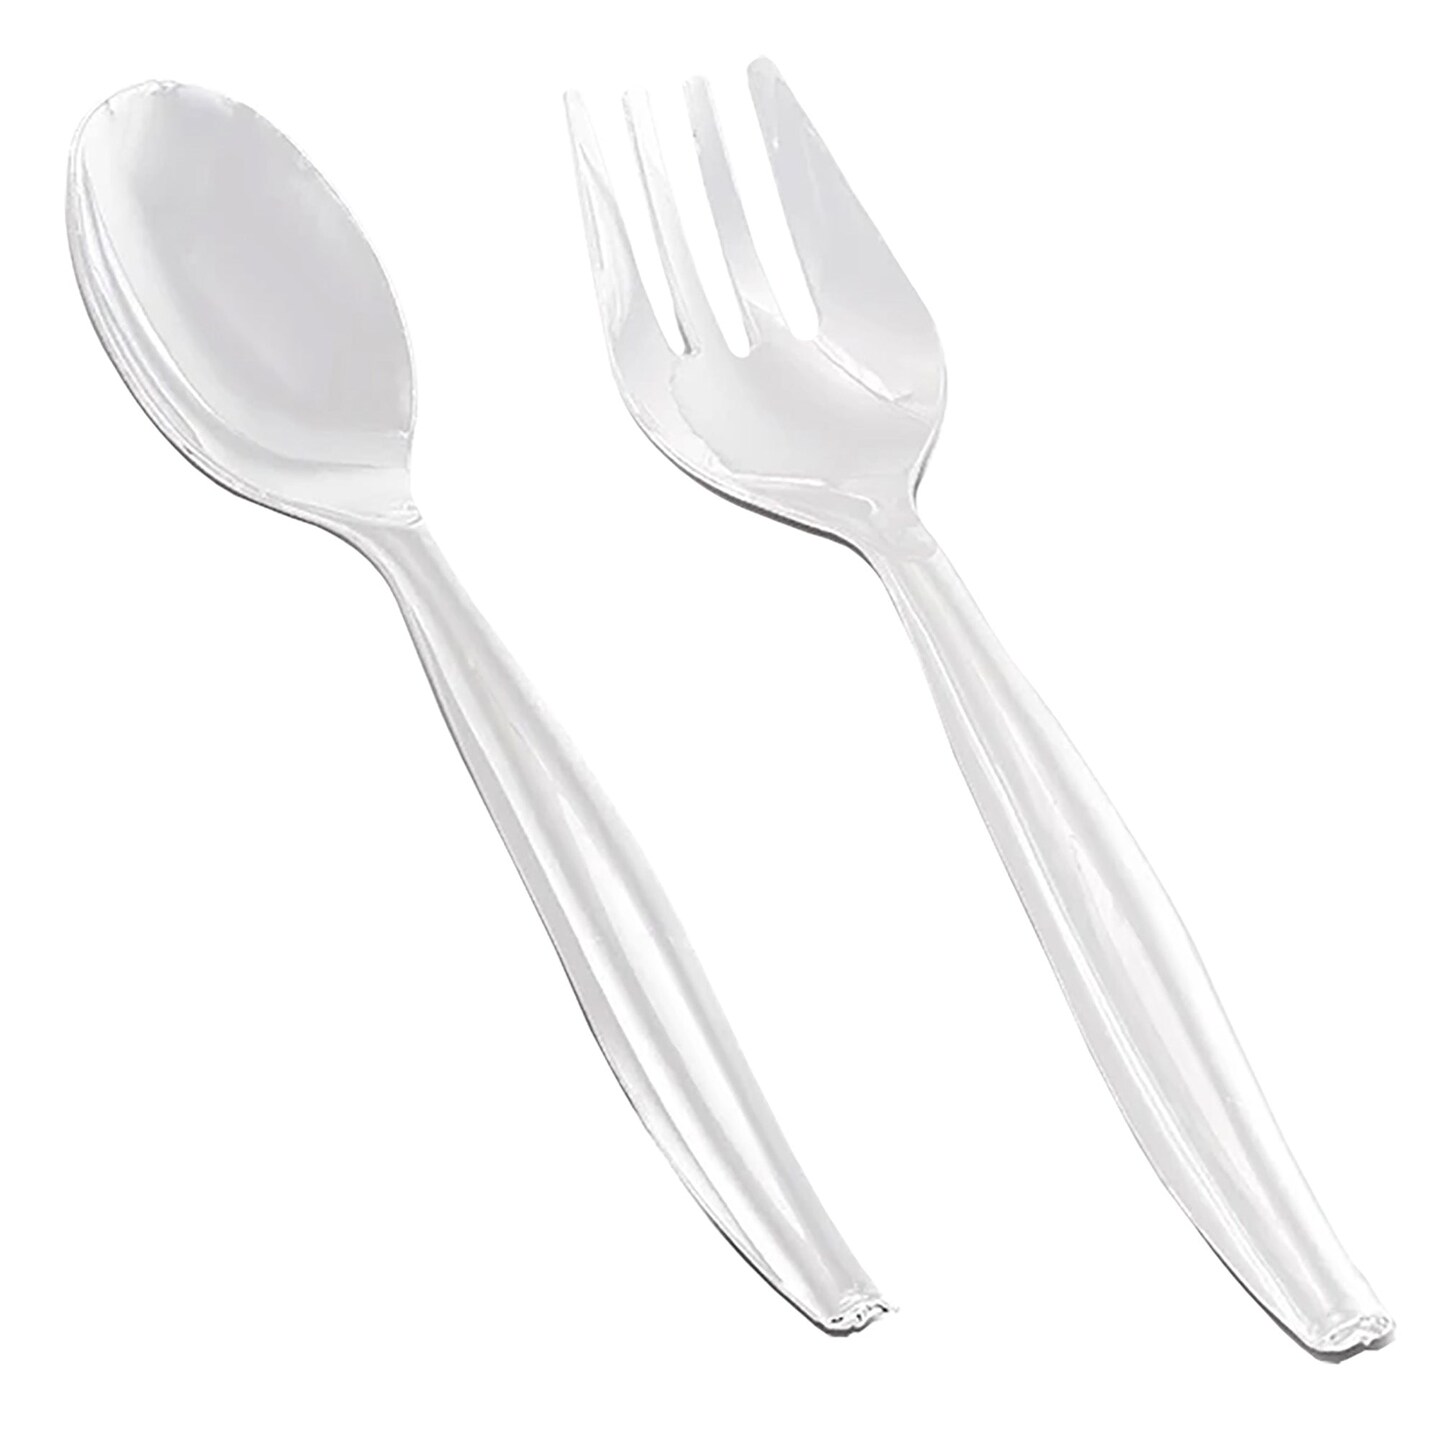 Clear Disposable Plastic Serving Flatware Set - Serving Spoons and Serving Forks (150 Pairs)